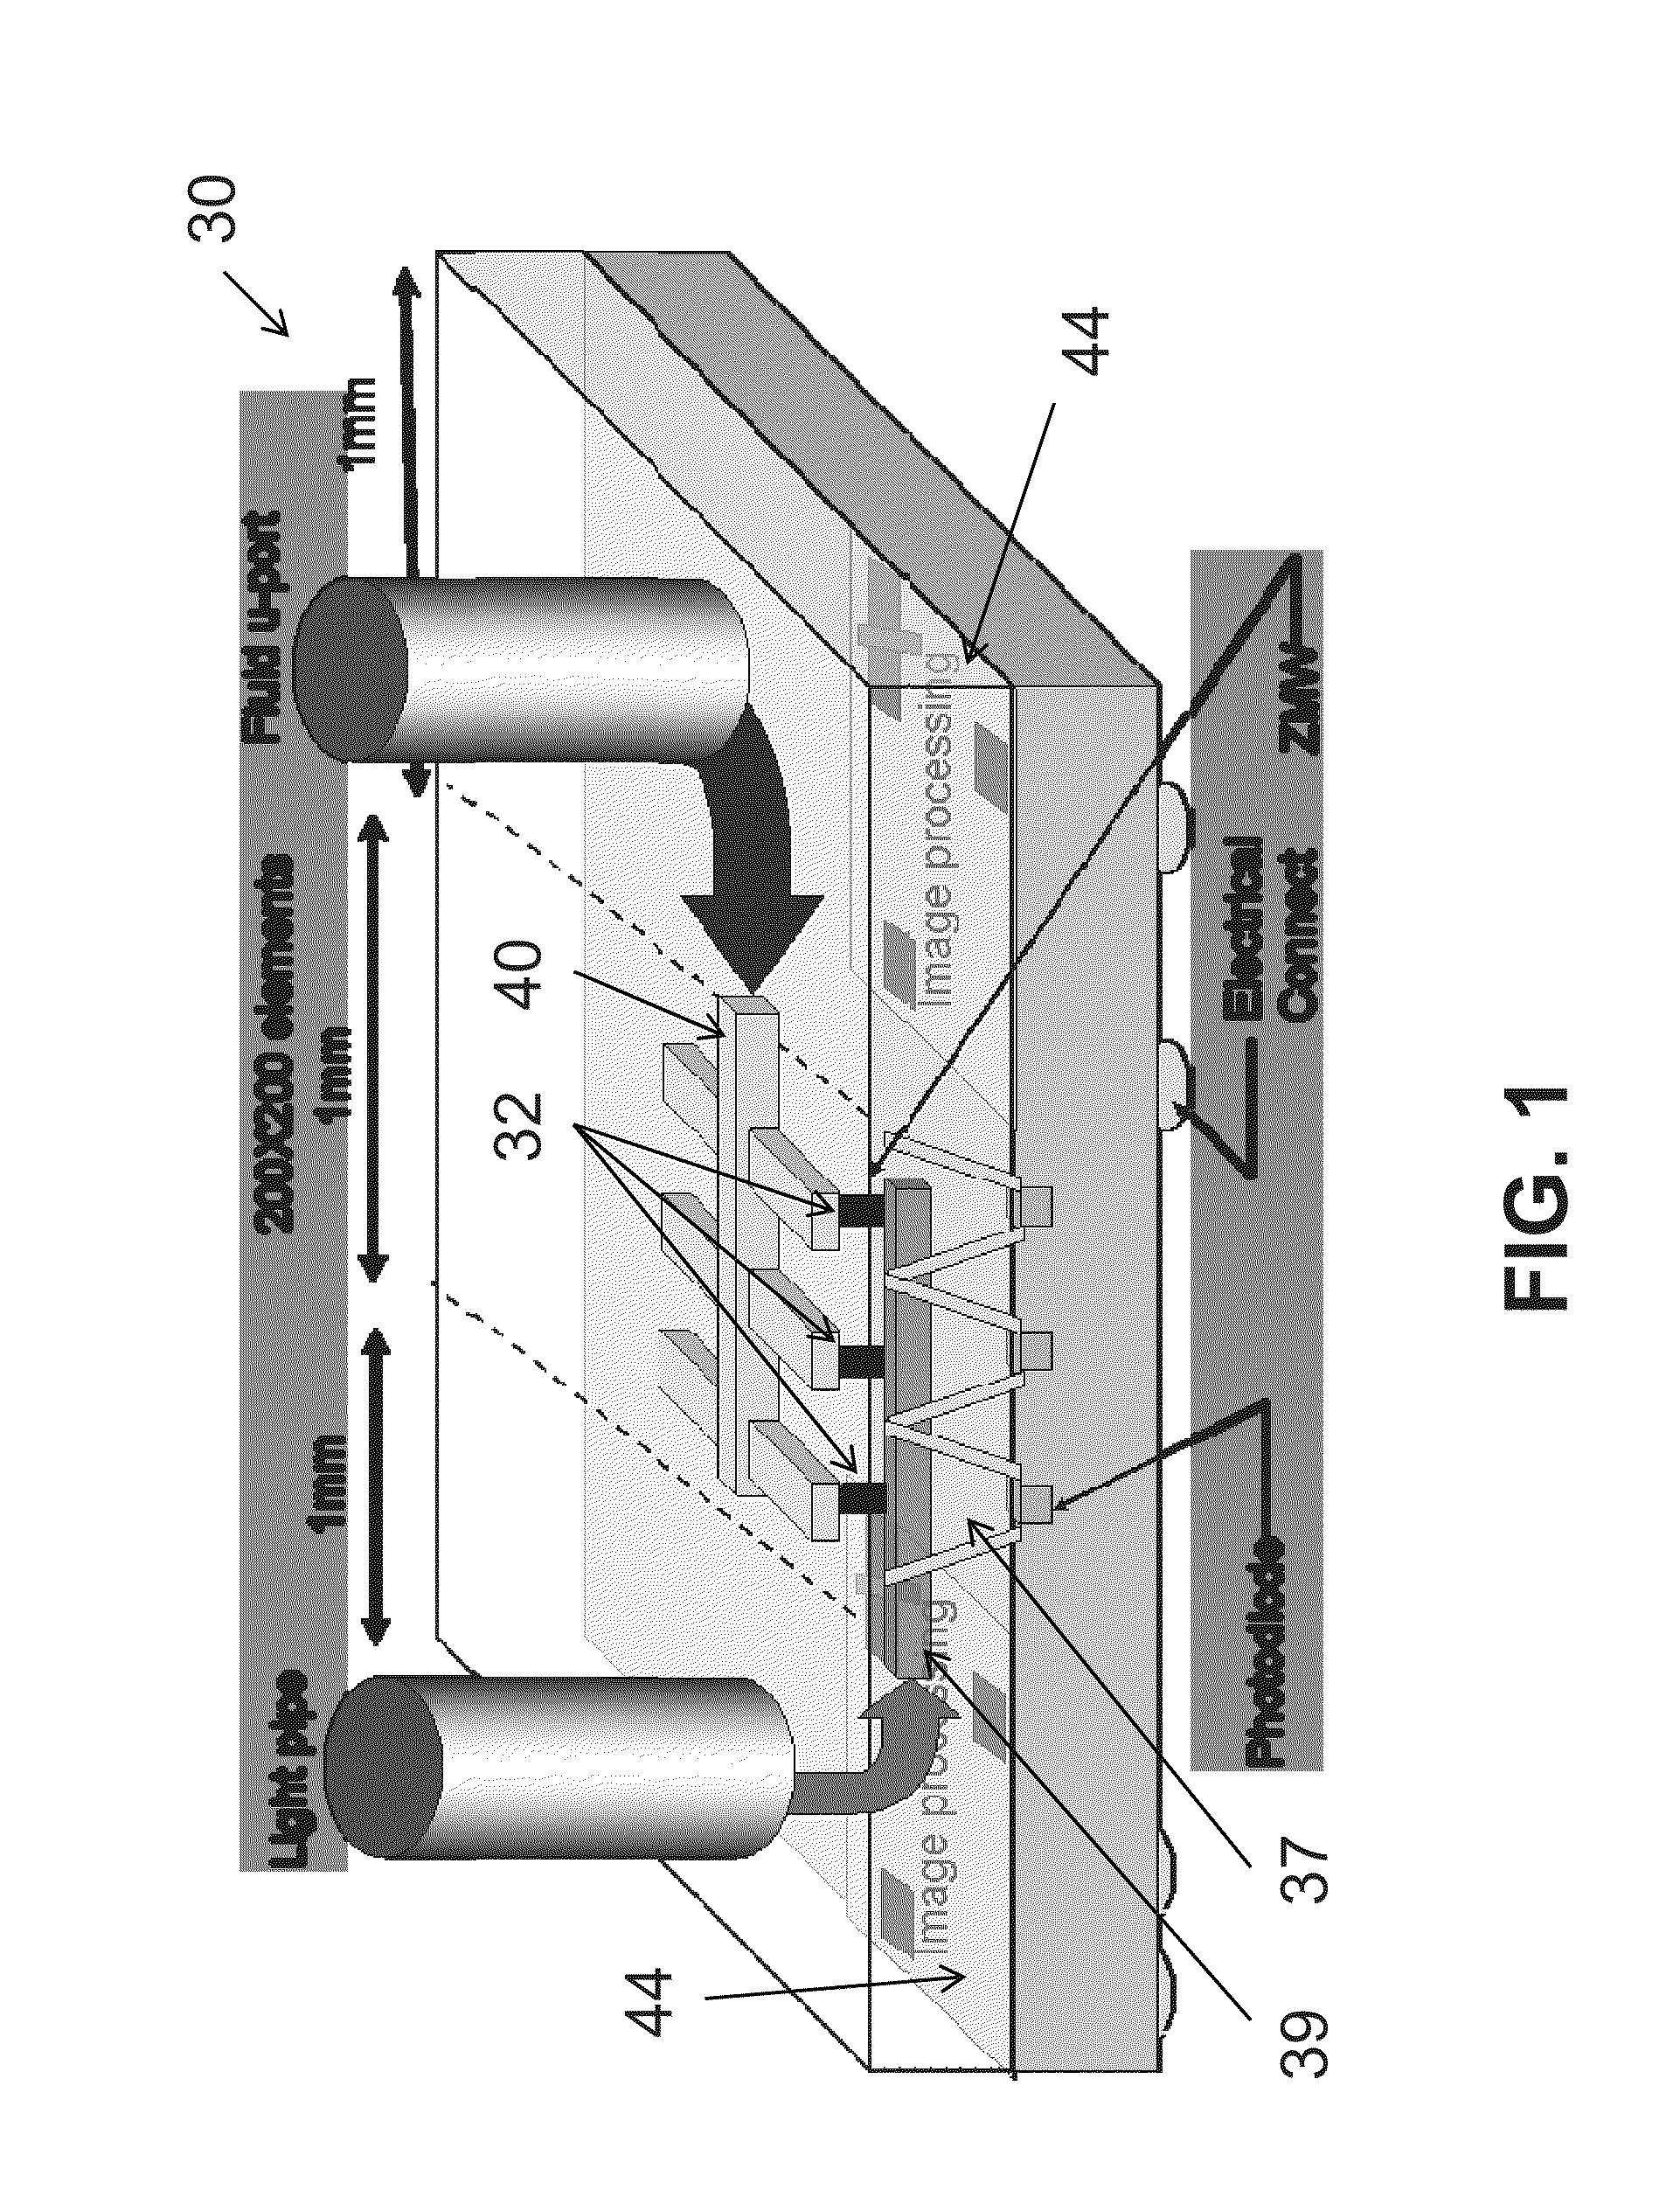 Optics collection and detection system and method